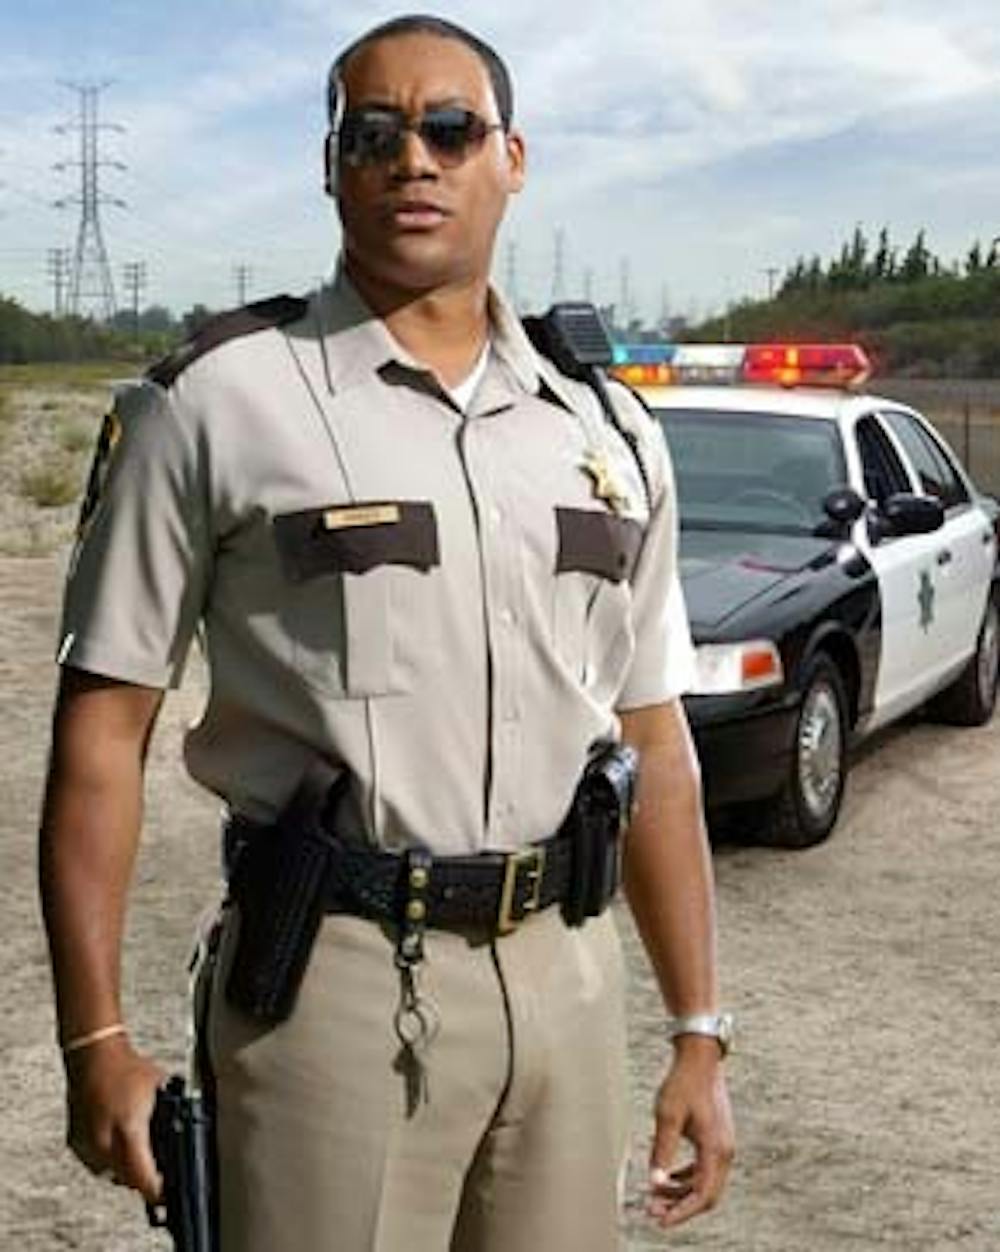 Cedric Yarbrough as "Deputy S. Jones" was once described as "a big, hardworking, robust, sort of mocha-ish person" by Lieutenant Dangle in a D.A. deposition. Photos courtesy Comedy Central